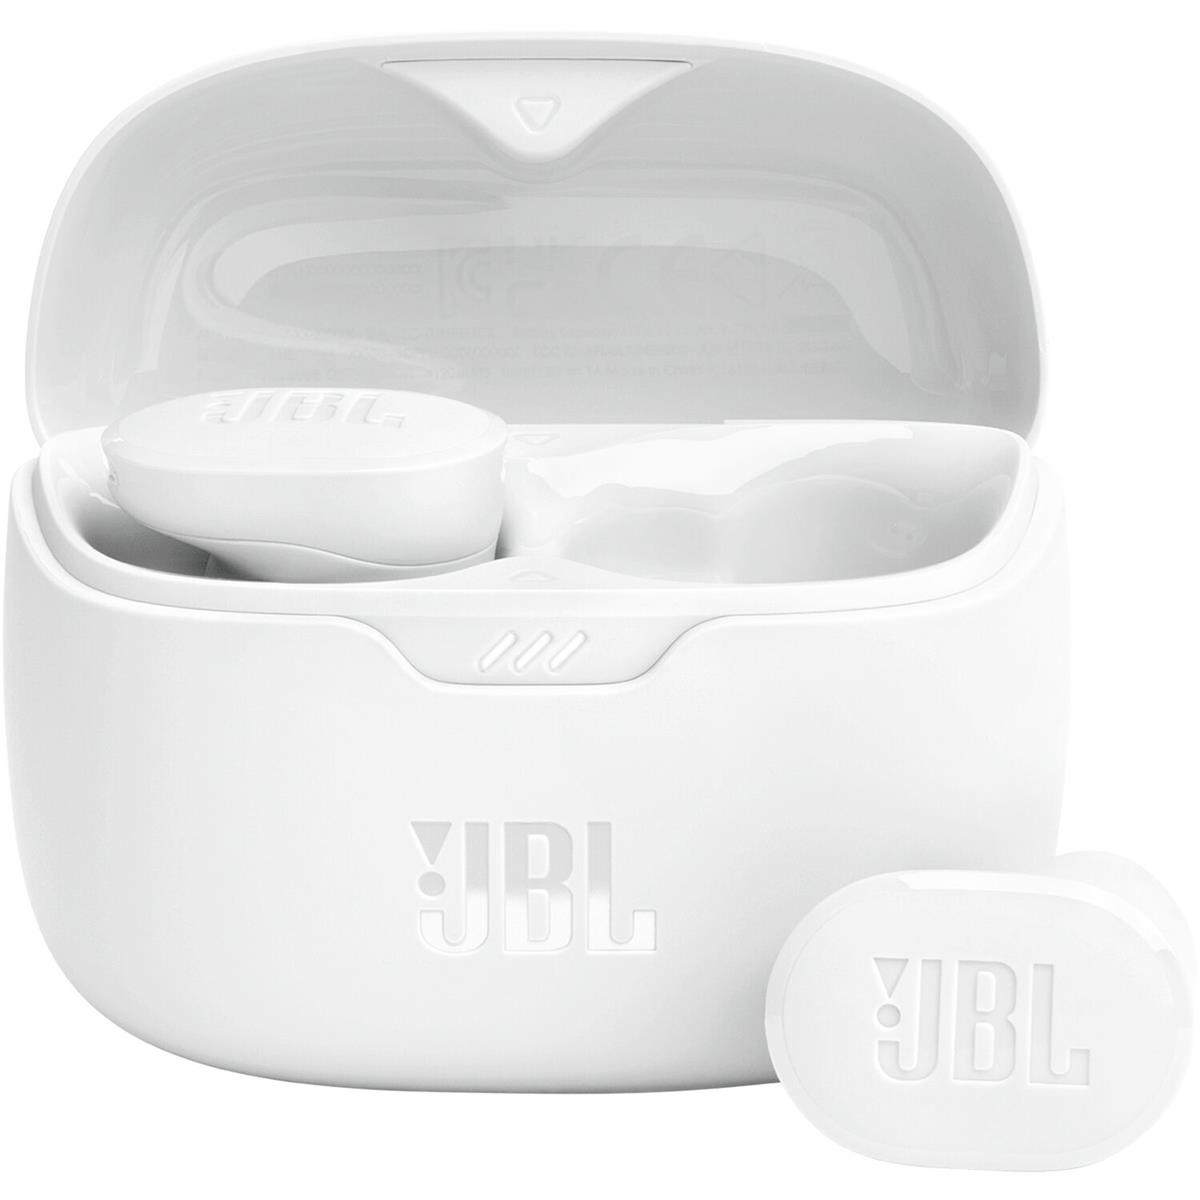 Image of JBL Tune Buds True wireless Noise Cancelling Earbuds